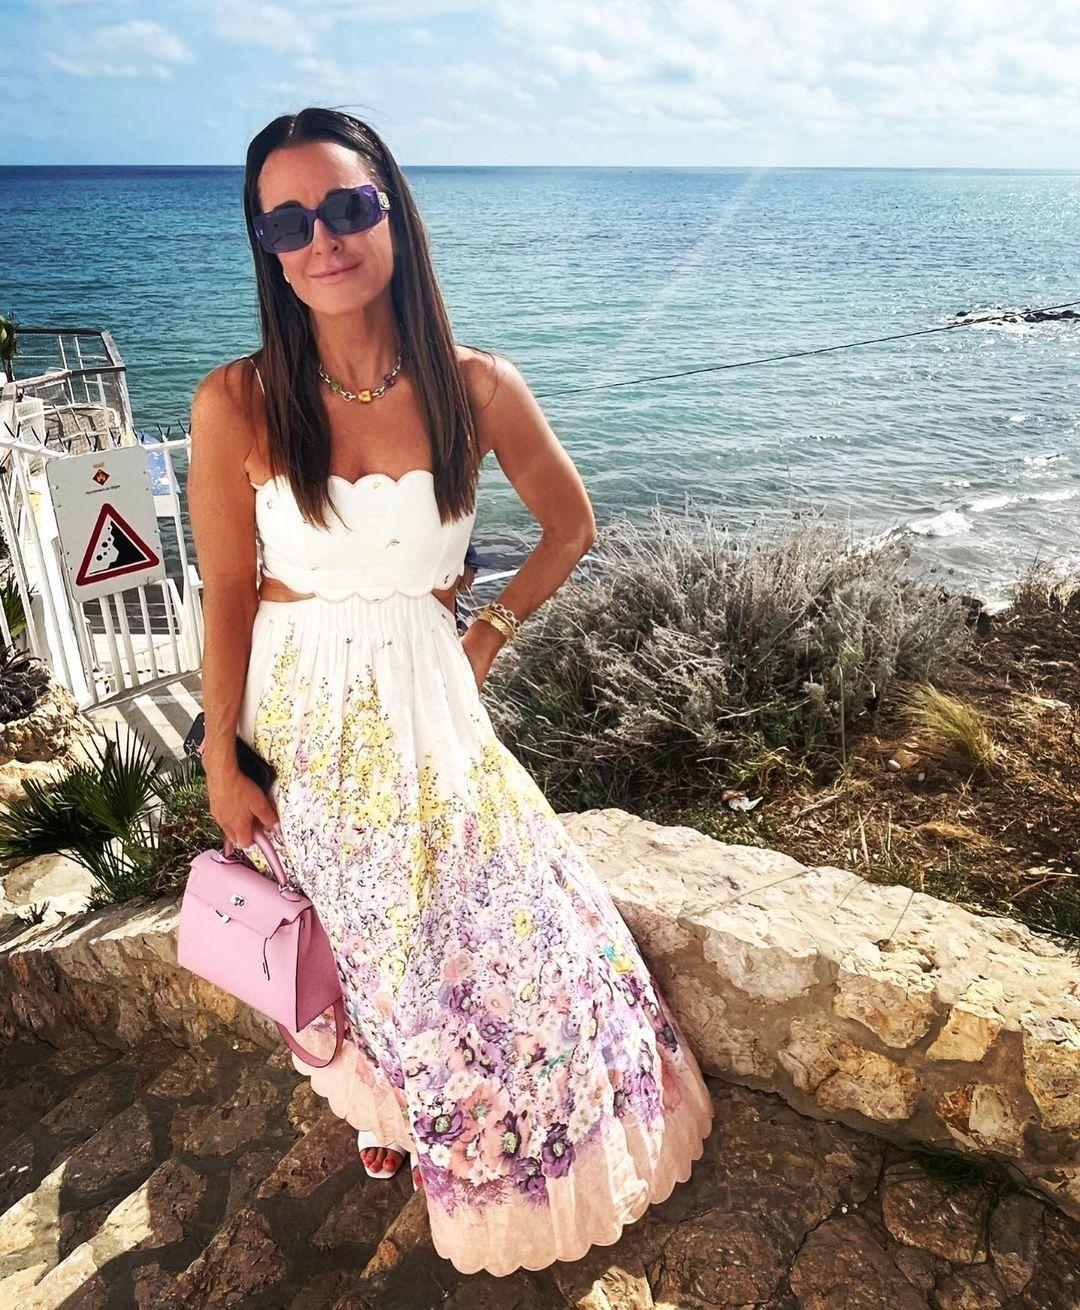 Kyle Richards Is 'Taking It All In' With Stunning Summer Dress